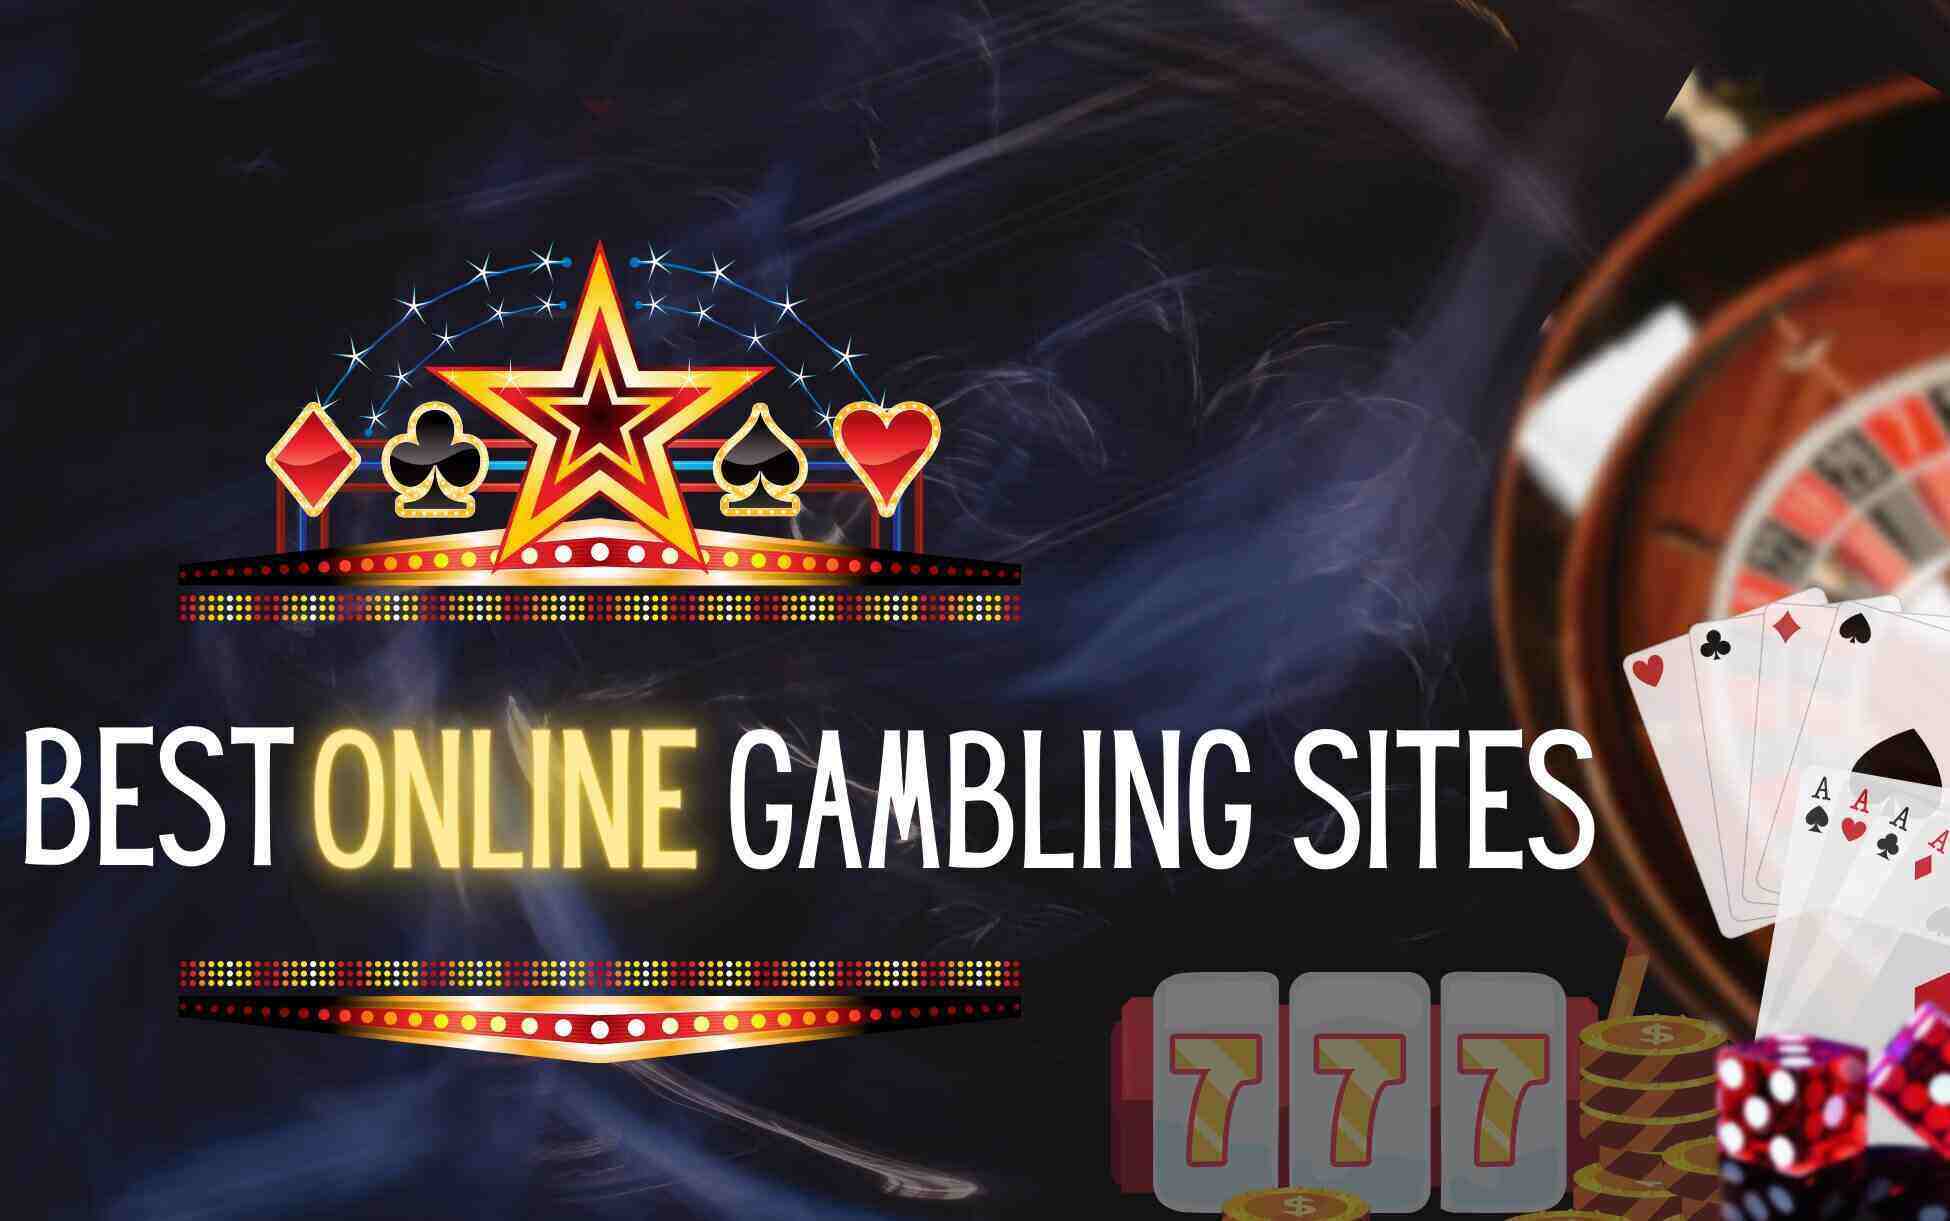 The casino That Wins Customers